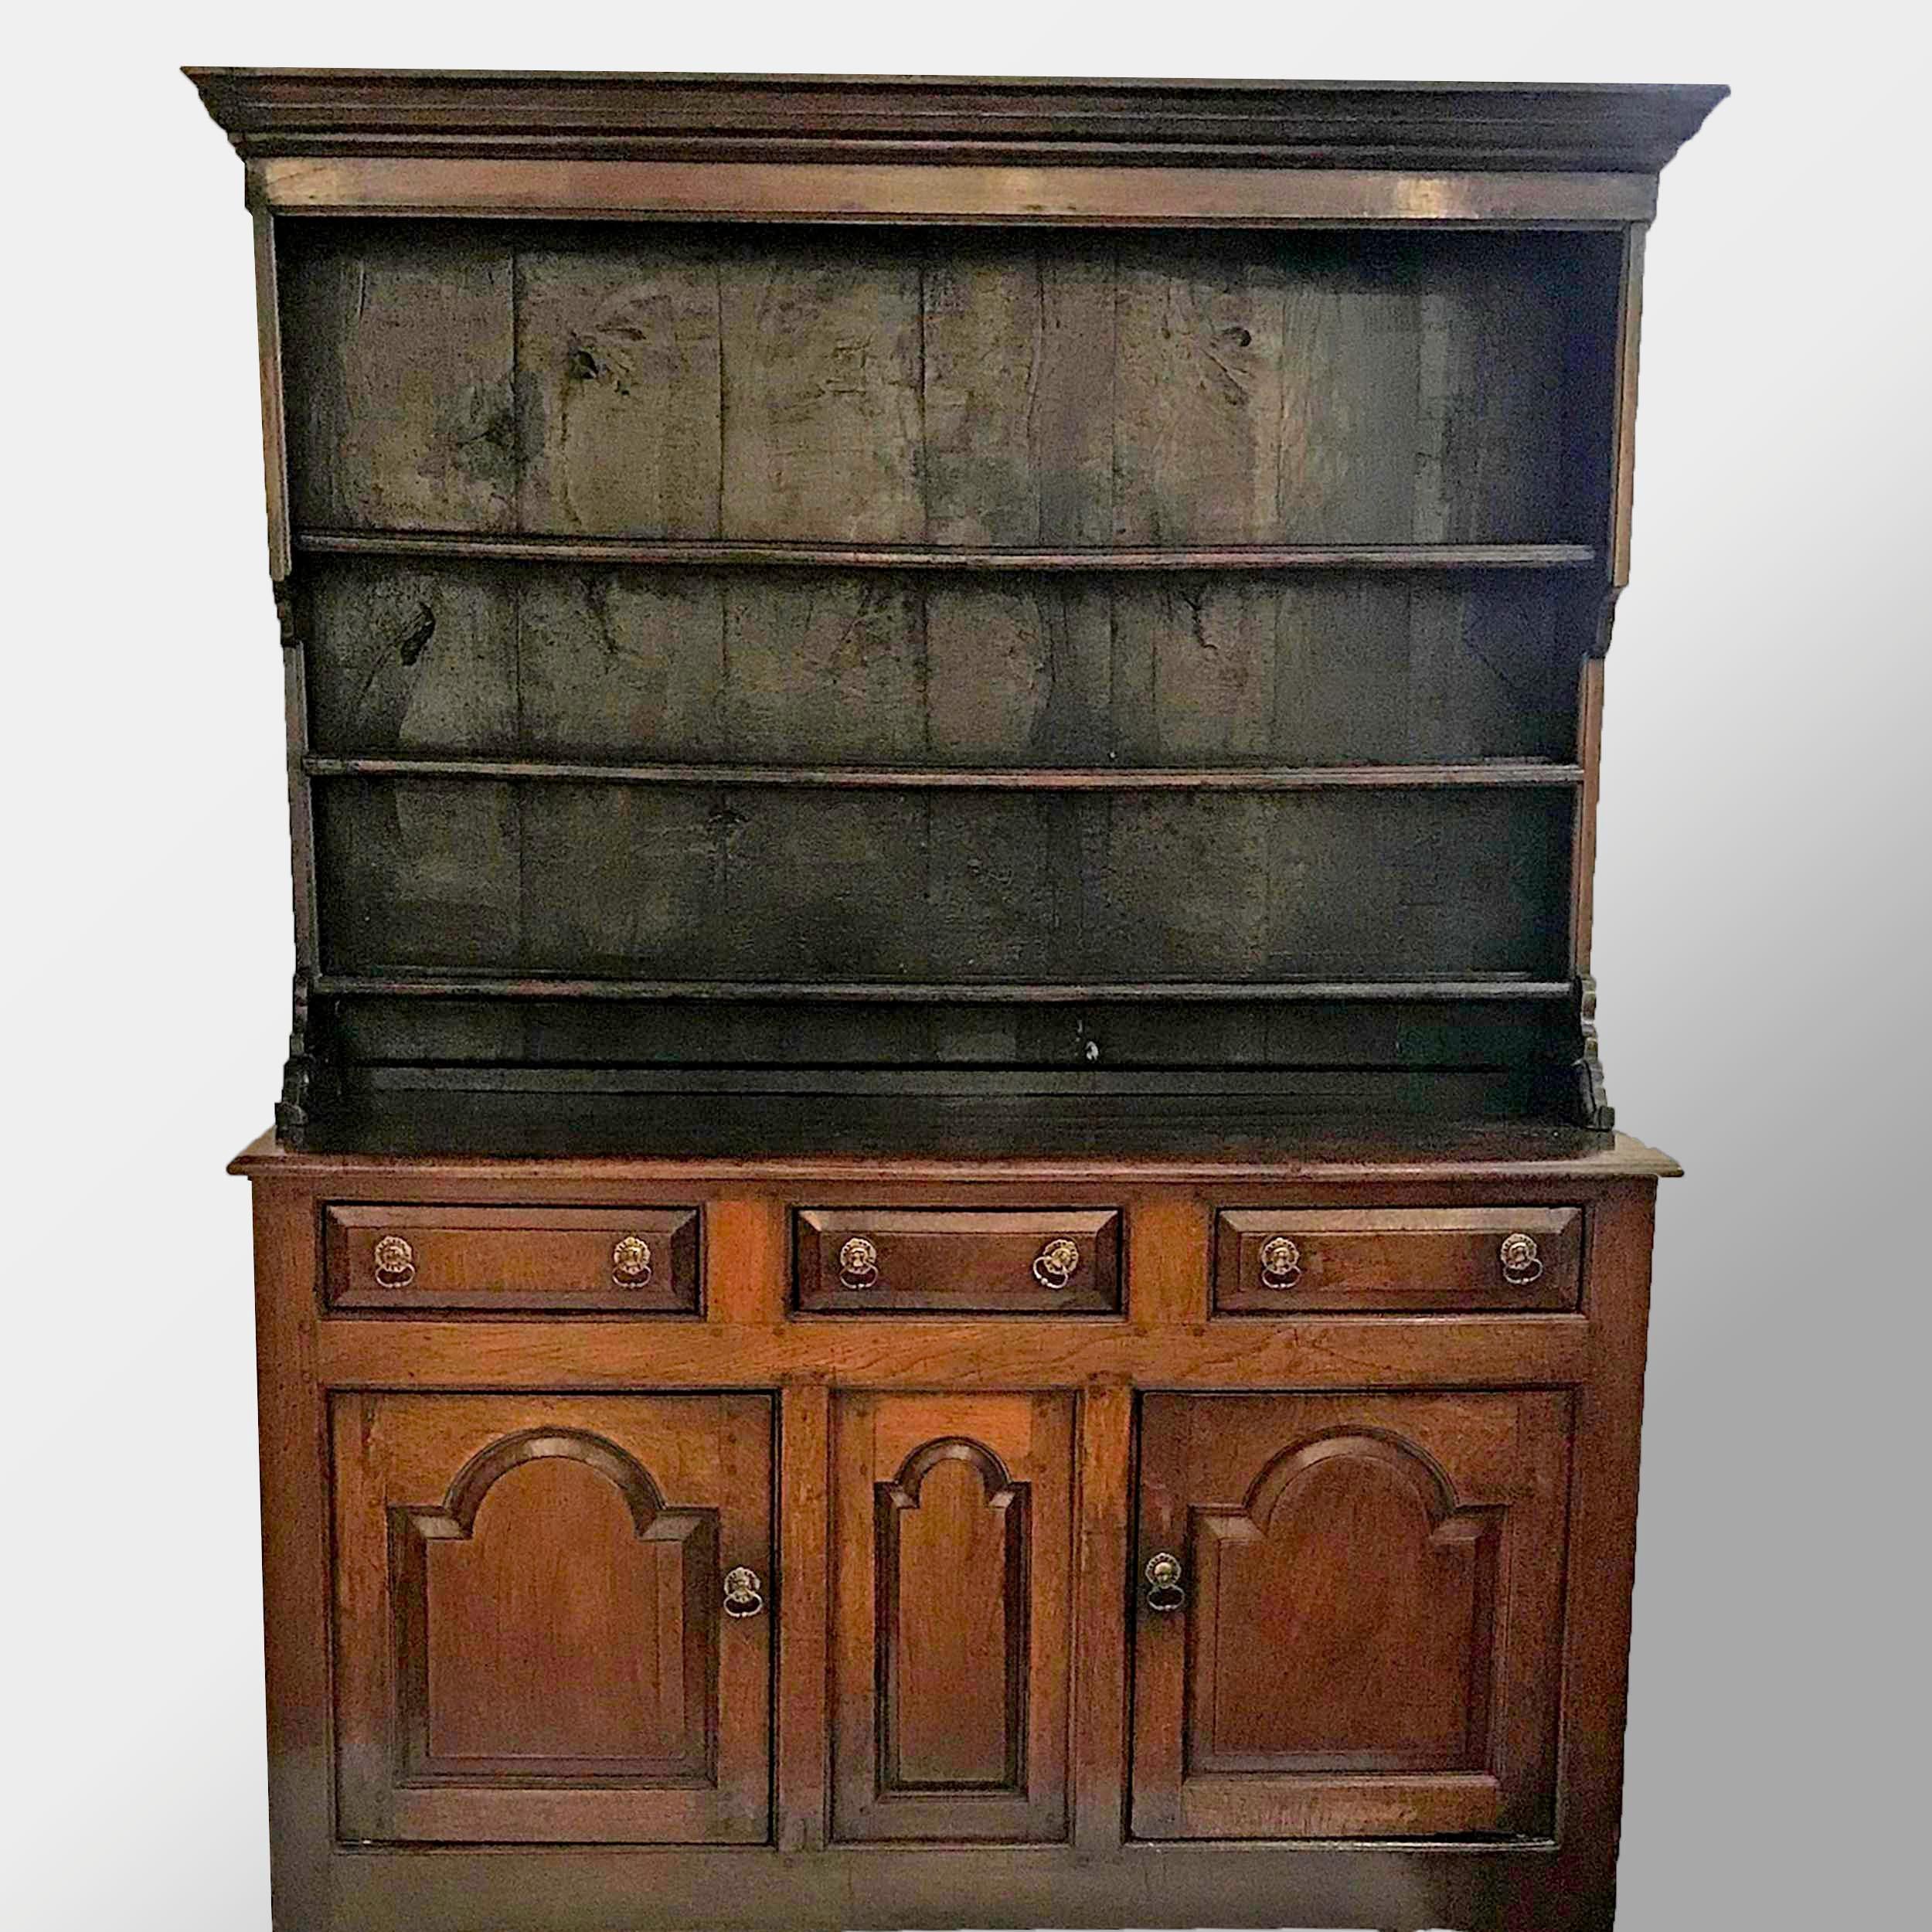 Welsh dresser in two parts. The upper section with a rectangular molded cornice above an open section with three plate racks and notched sides. The lower section with three short drawers above two-paneled arcaded doors and an arcaded center panel.